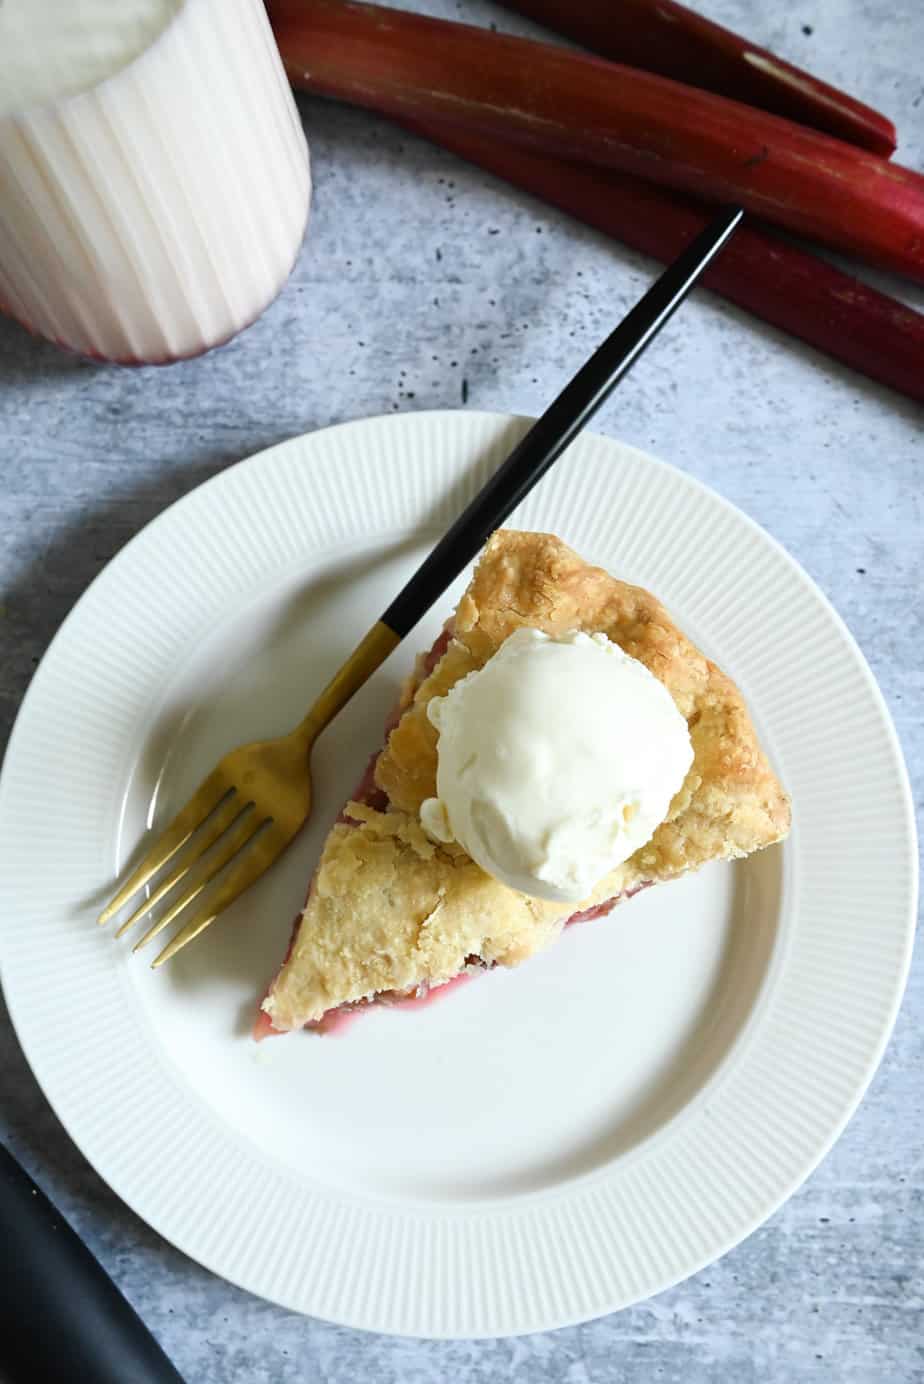 Overhead view of a slice of rhubarb pie with a scoop of vanilla ice cream on top.